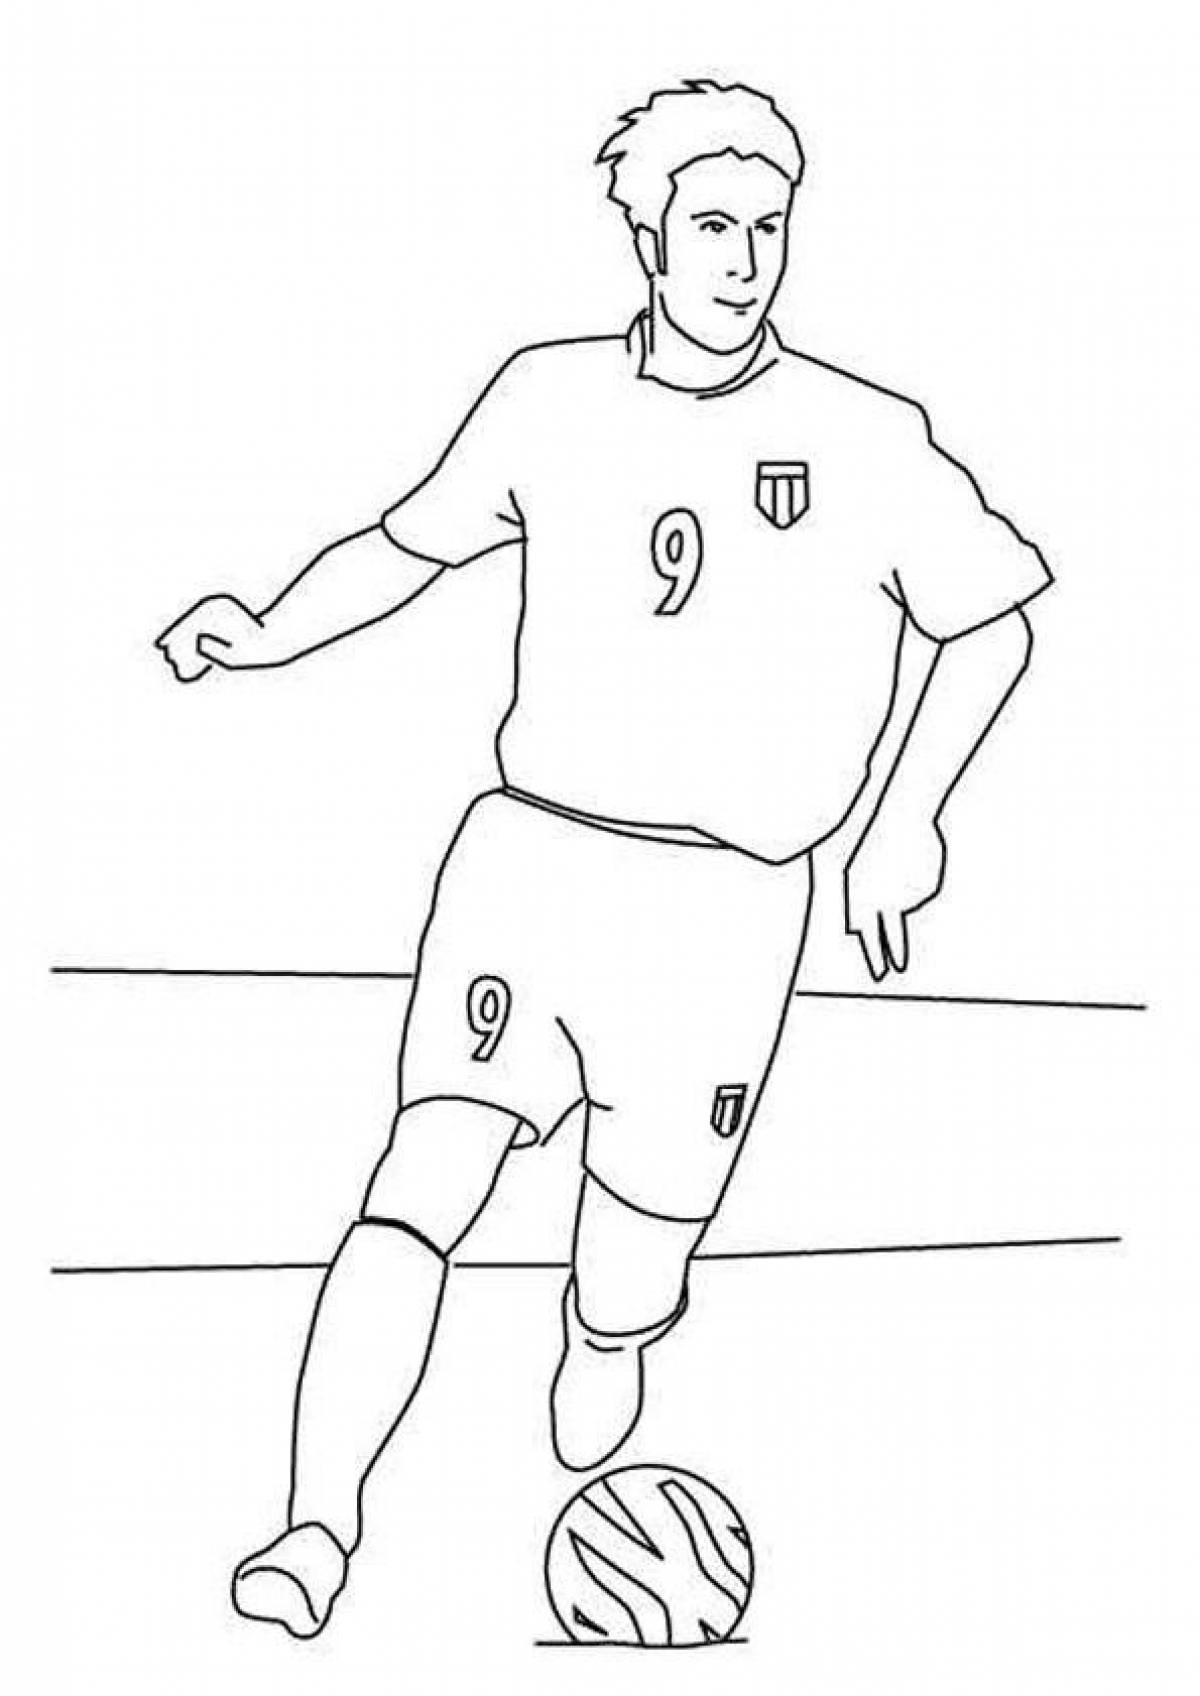 Coloring page agile footballer